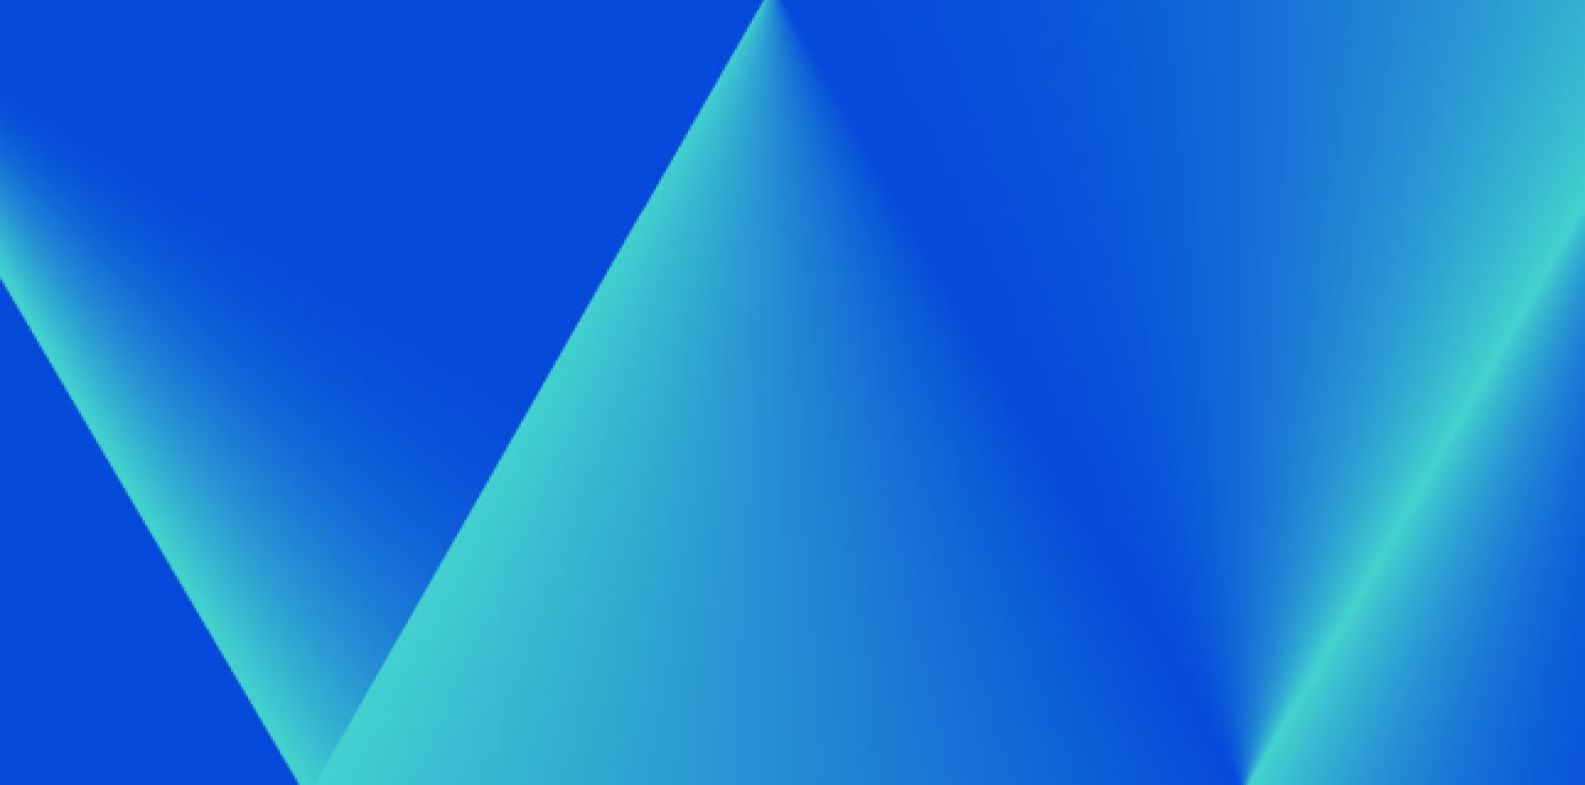 Blue background with blue green triangles